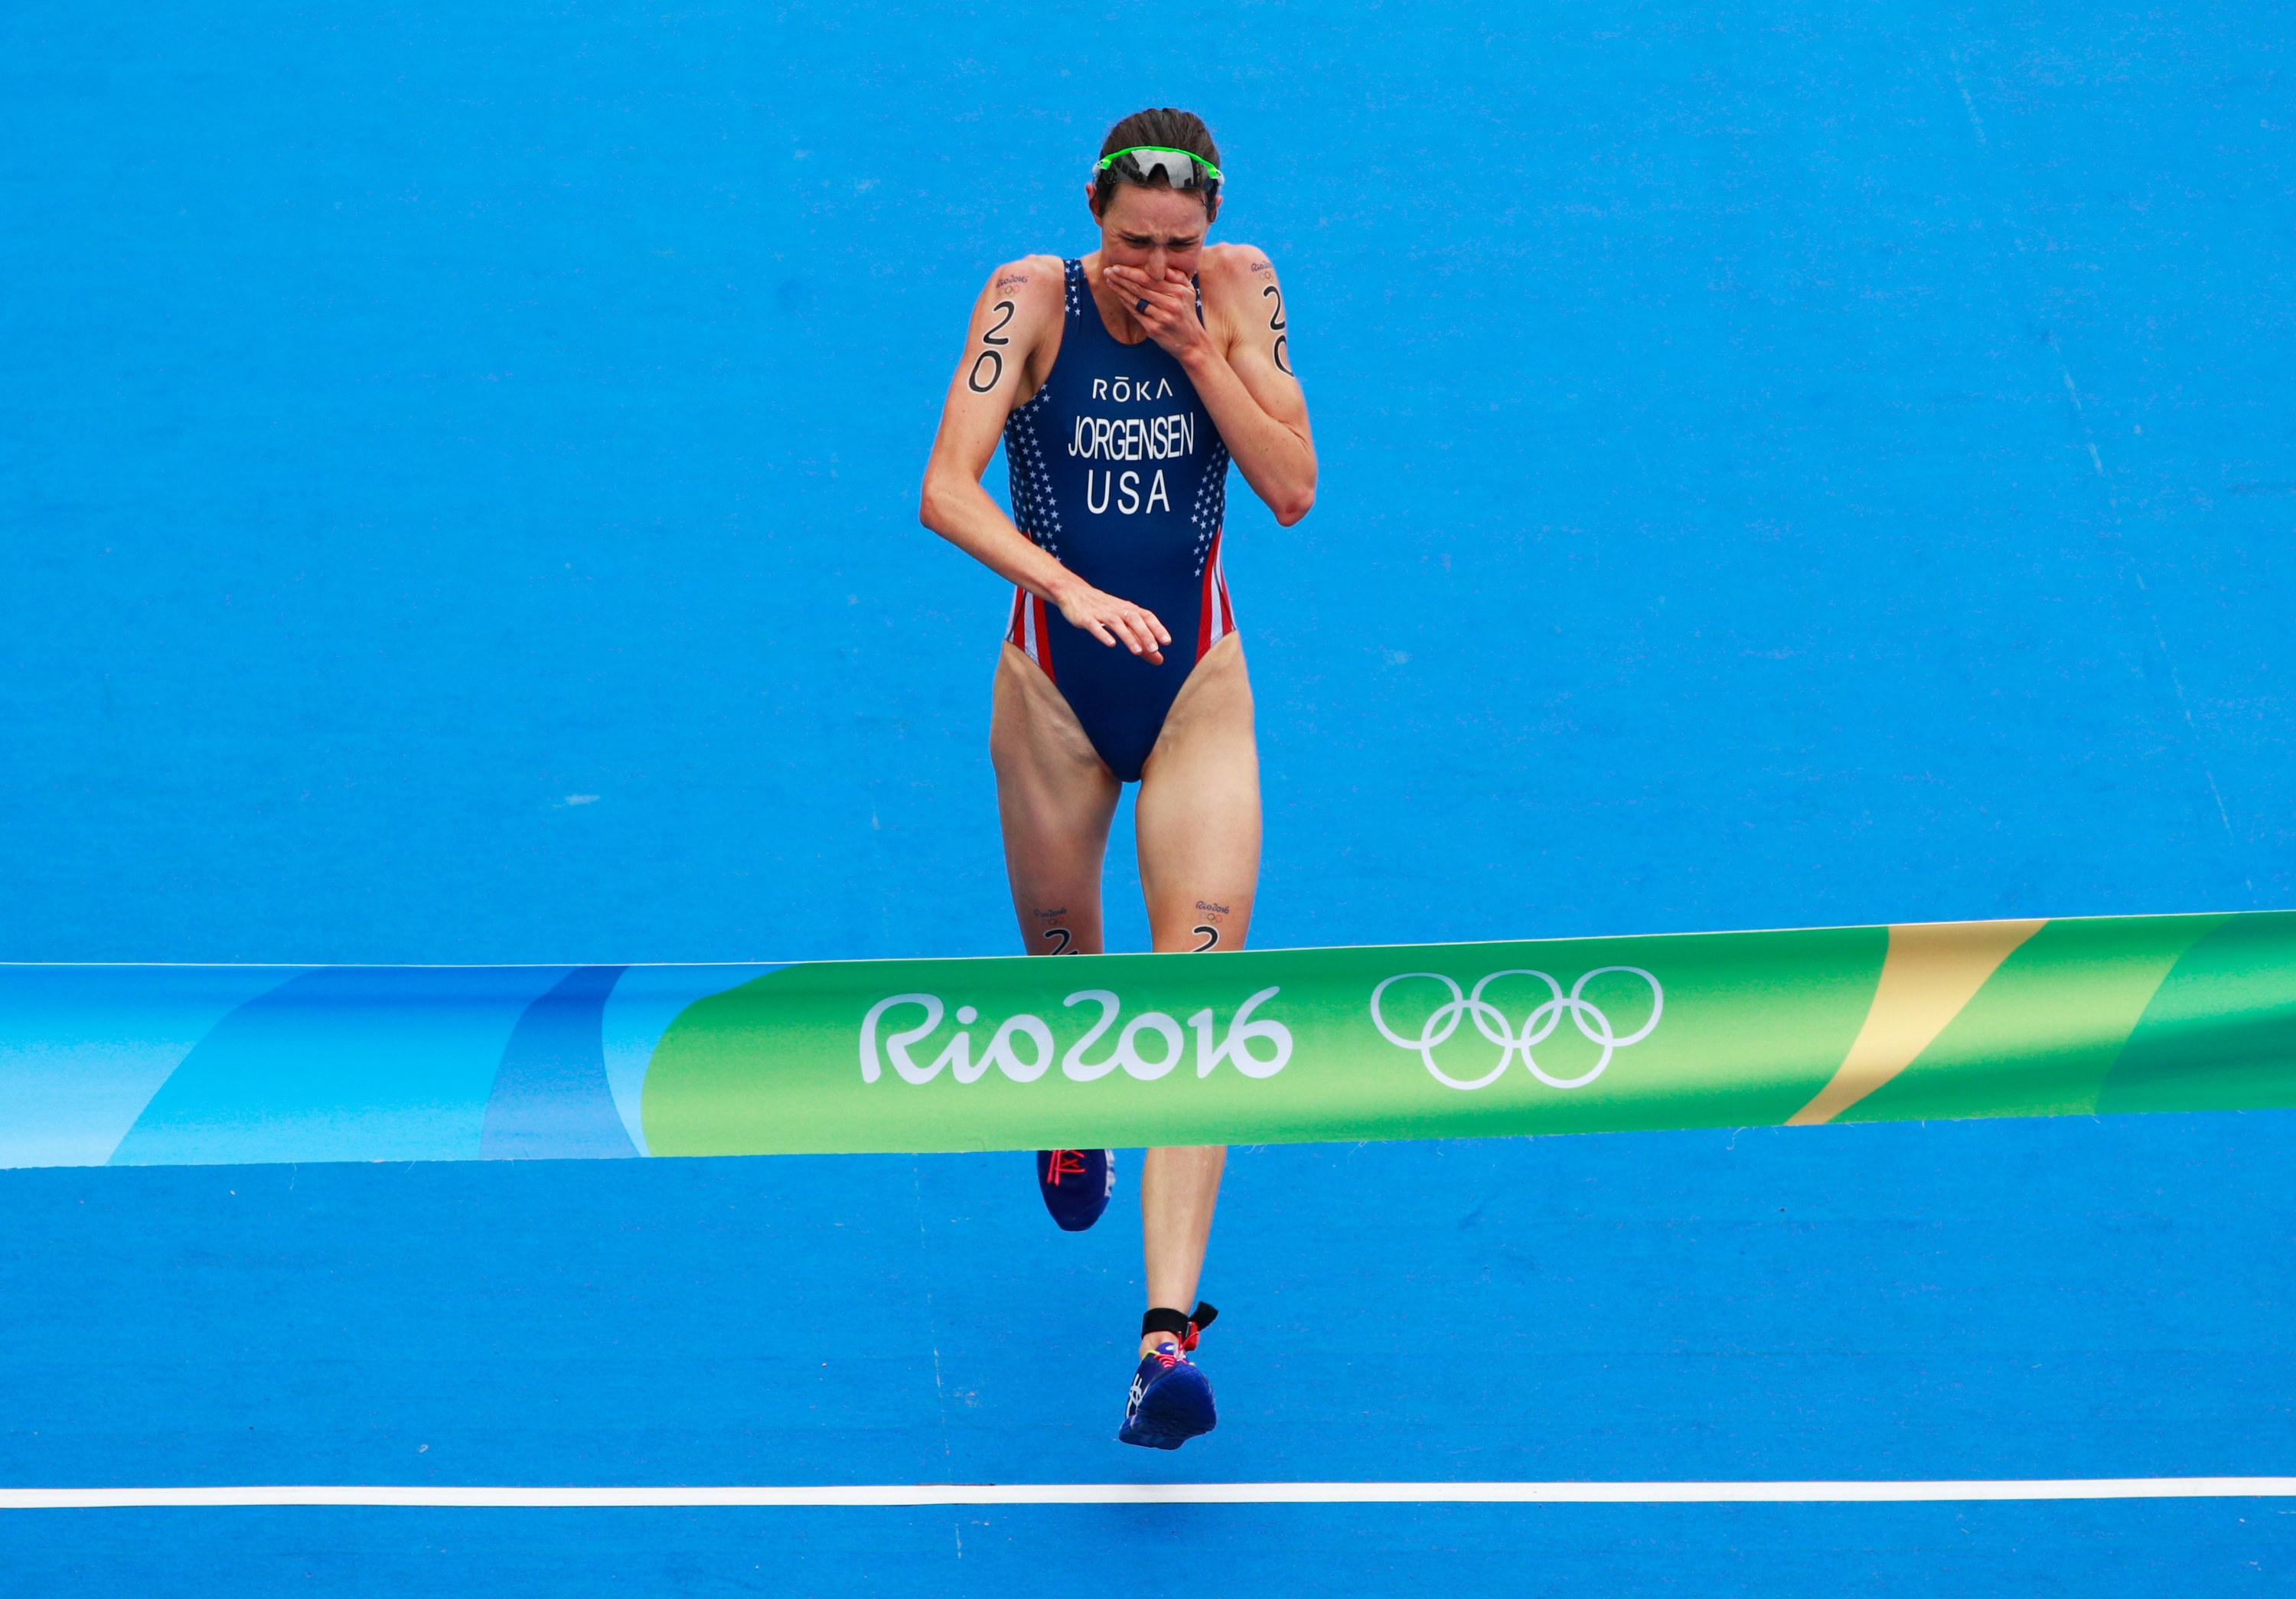 Swimmer crying as she runs across finish line